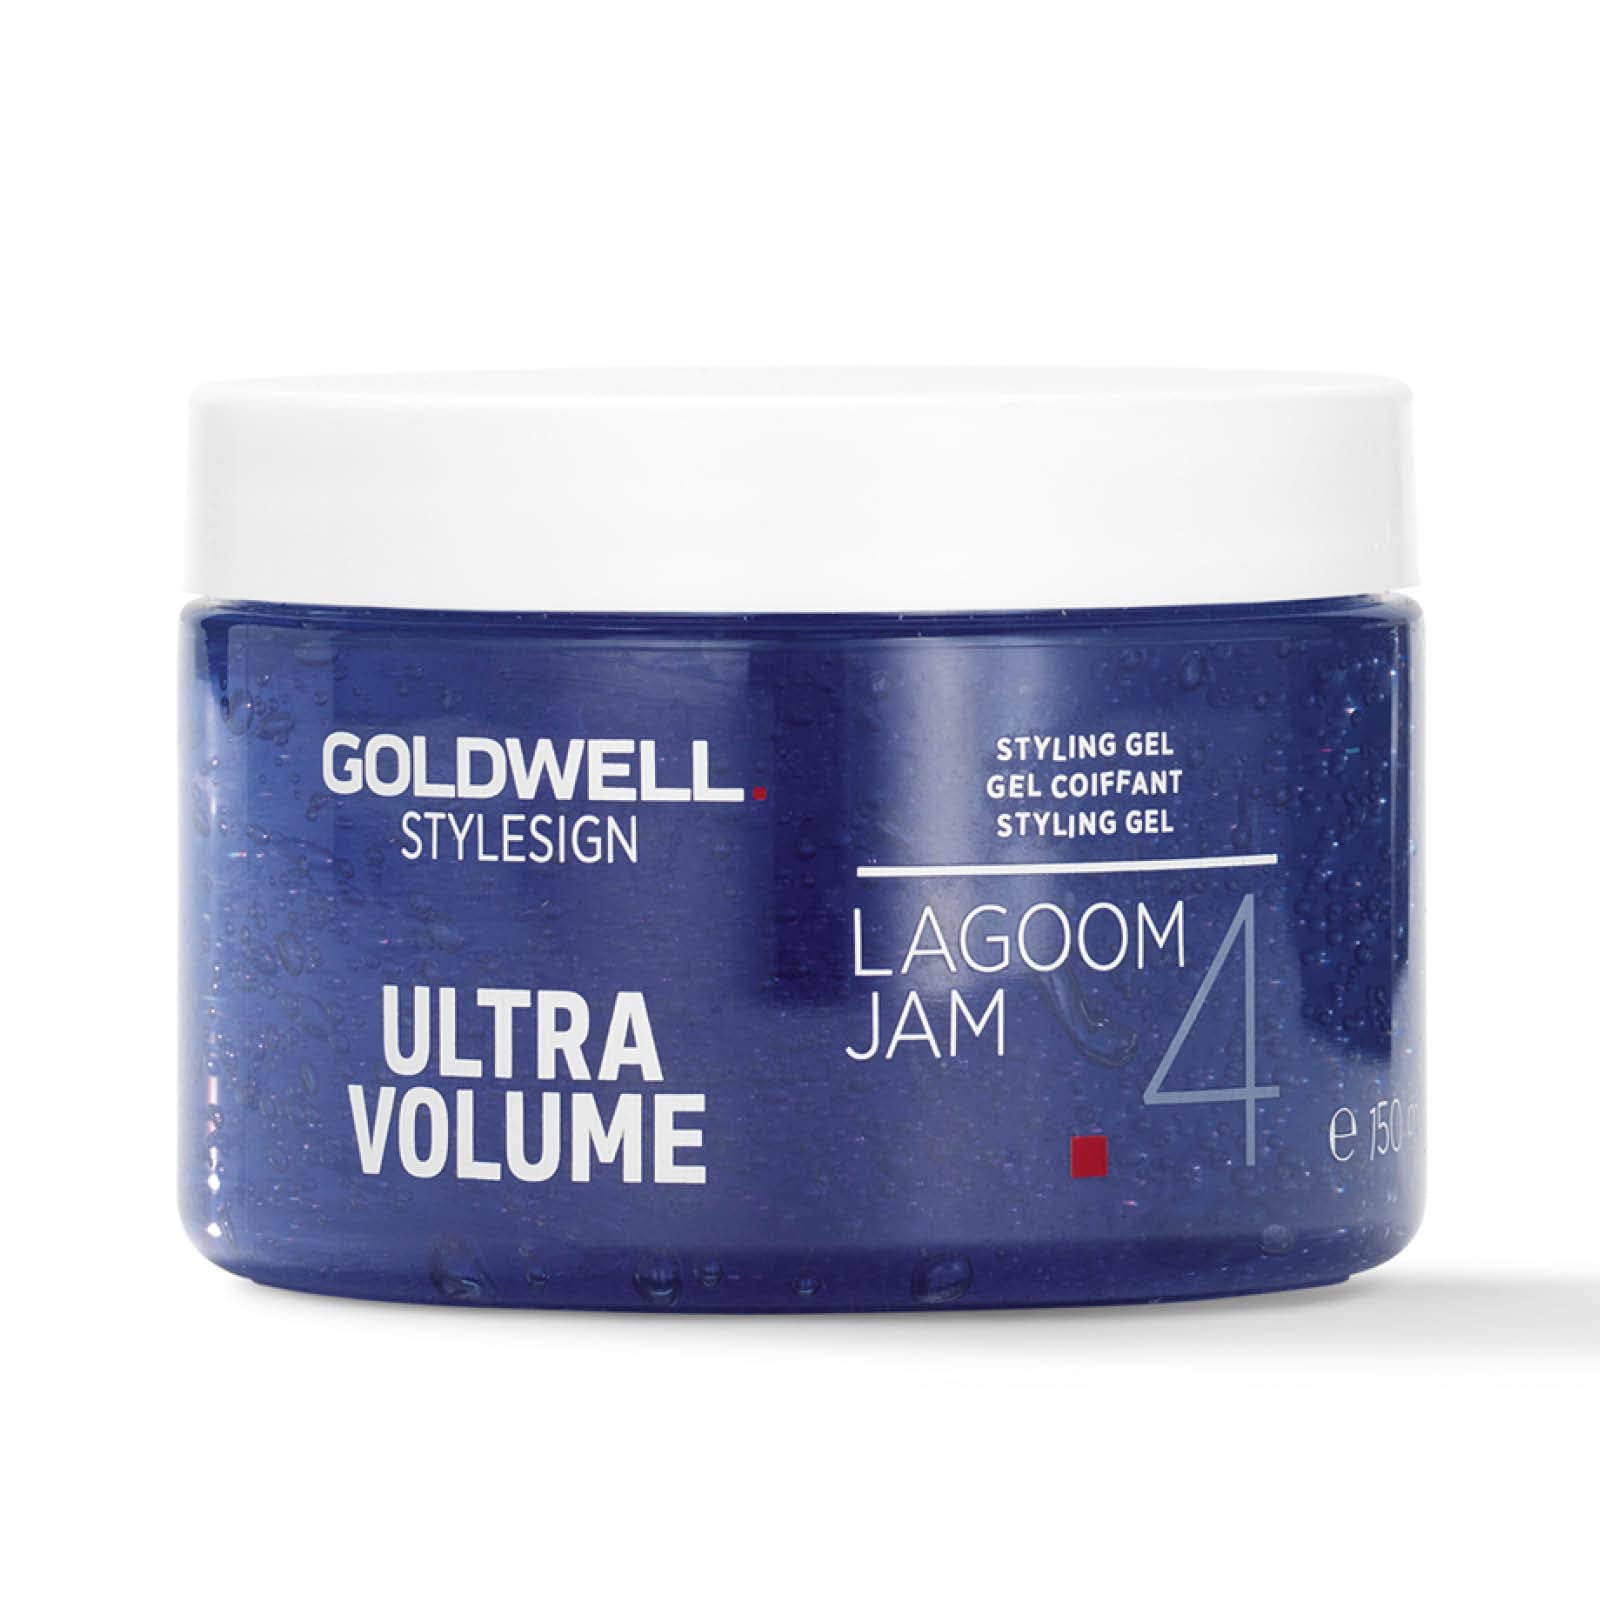 Goldwell StyleSign Goldwell Stylesign Ultra Volume Lagoom Jam Styling Gel for Straight, Wavy and Curly Hair, 150 ml (Pack of 1) White